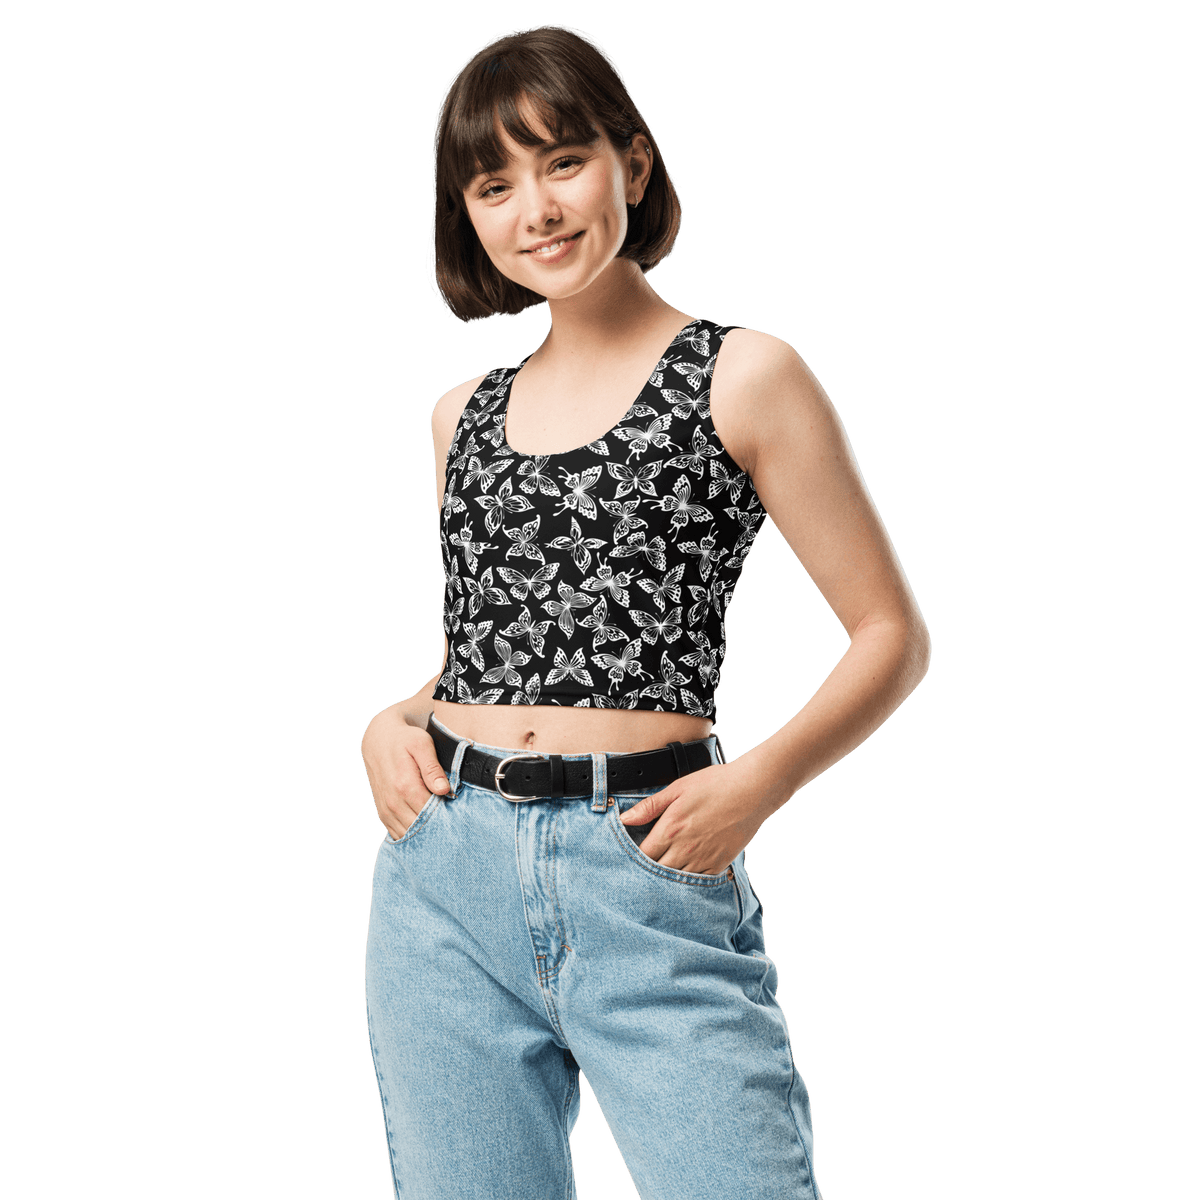 Butterfly Crop Top, Crop Top Women, Cute Crop Top, Crop Top, Cami, Aesthetic, Butterfly, Tee, Blouse, Y2K, Gift for her, Gift for mom